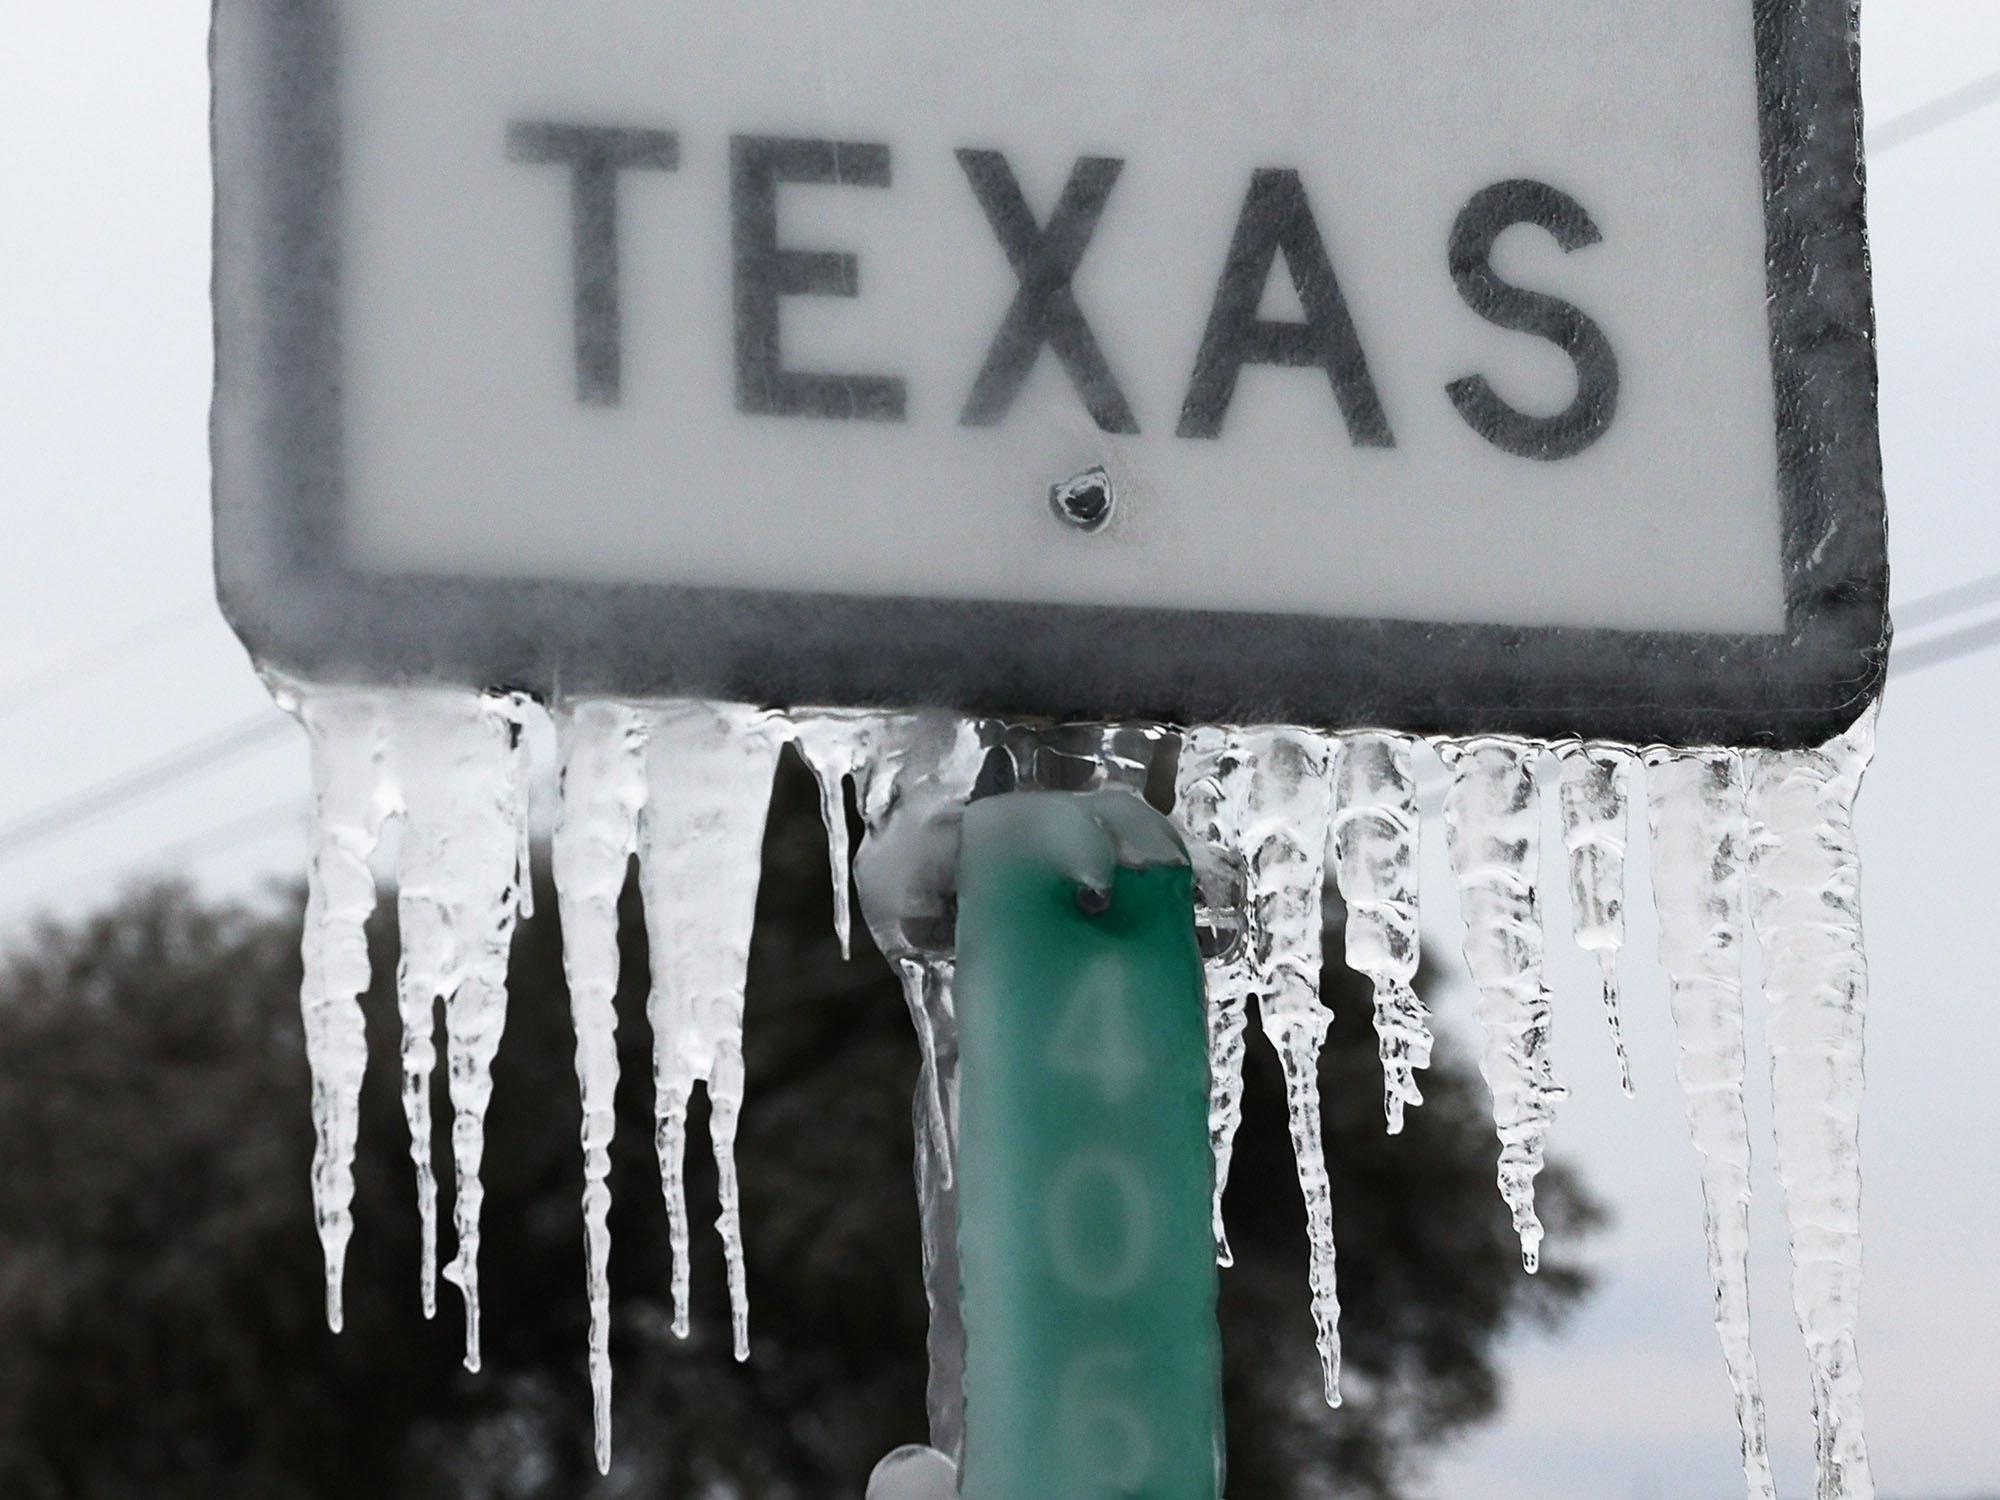 Texas icicle sign